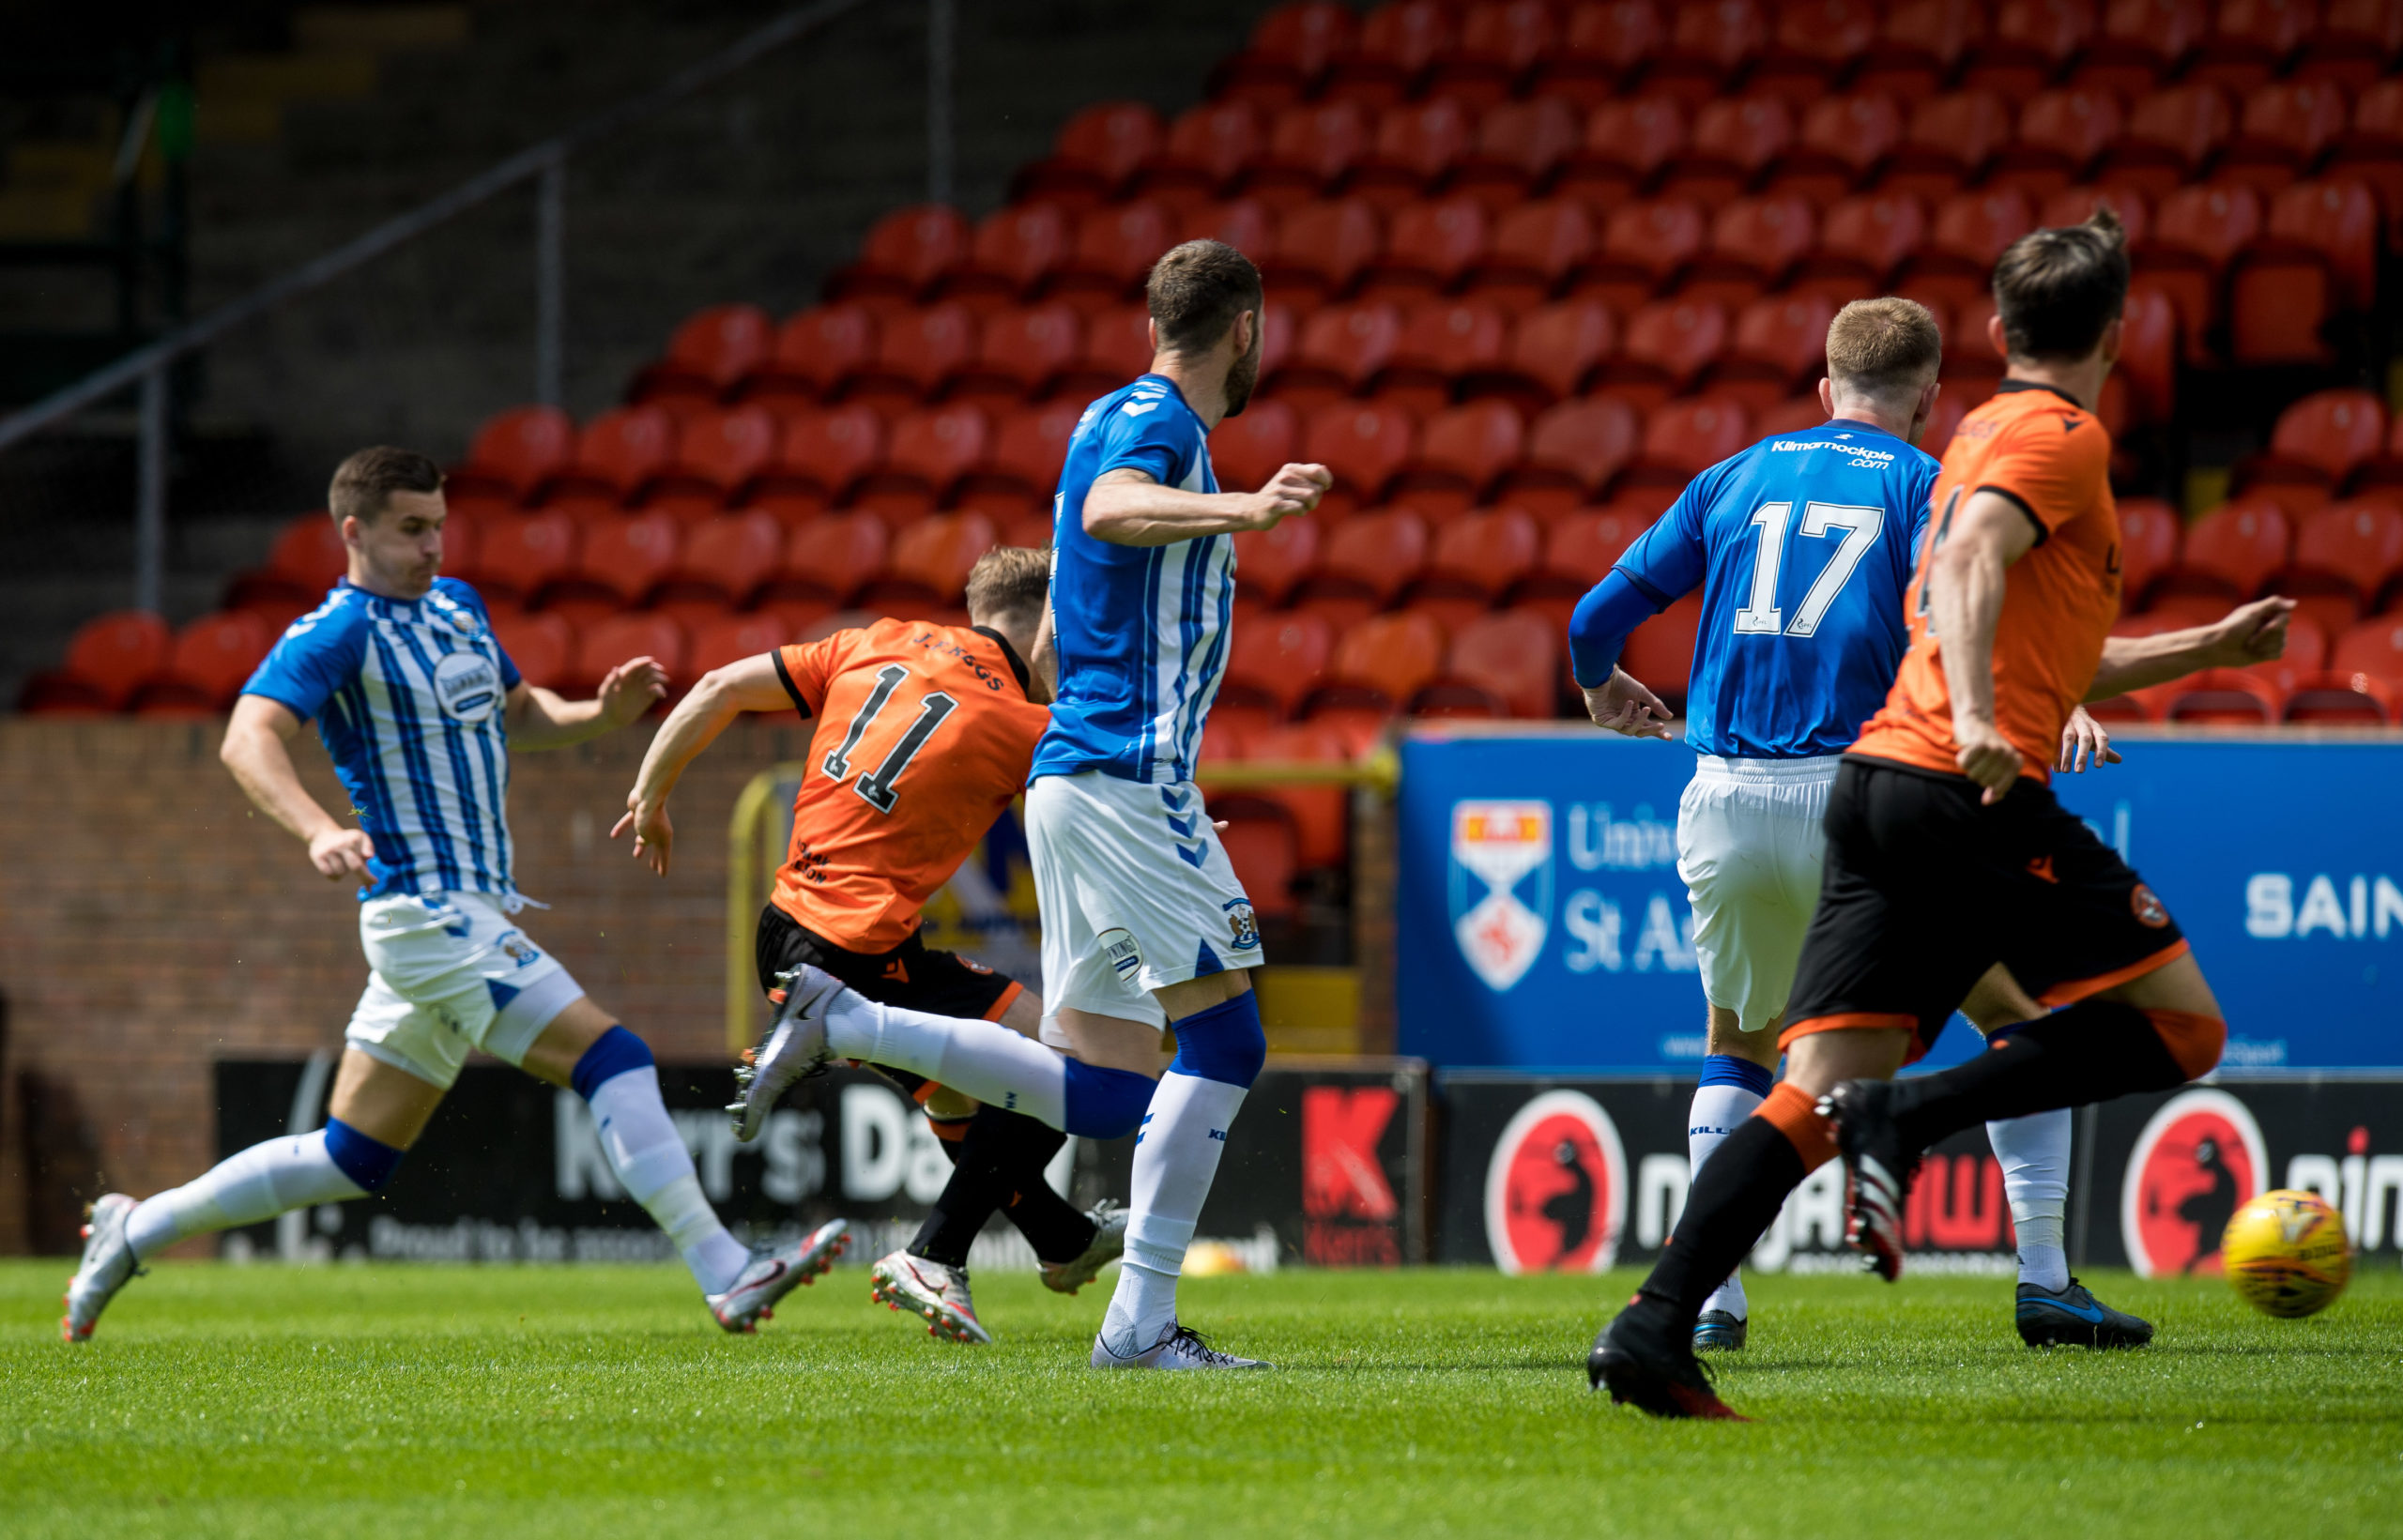 Cammy Smith opens the scoring for Dundee United.